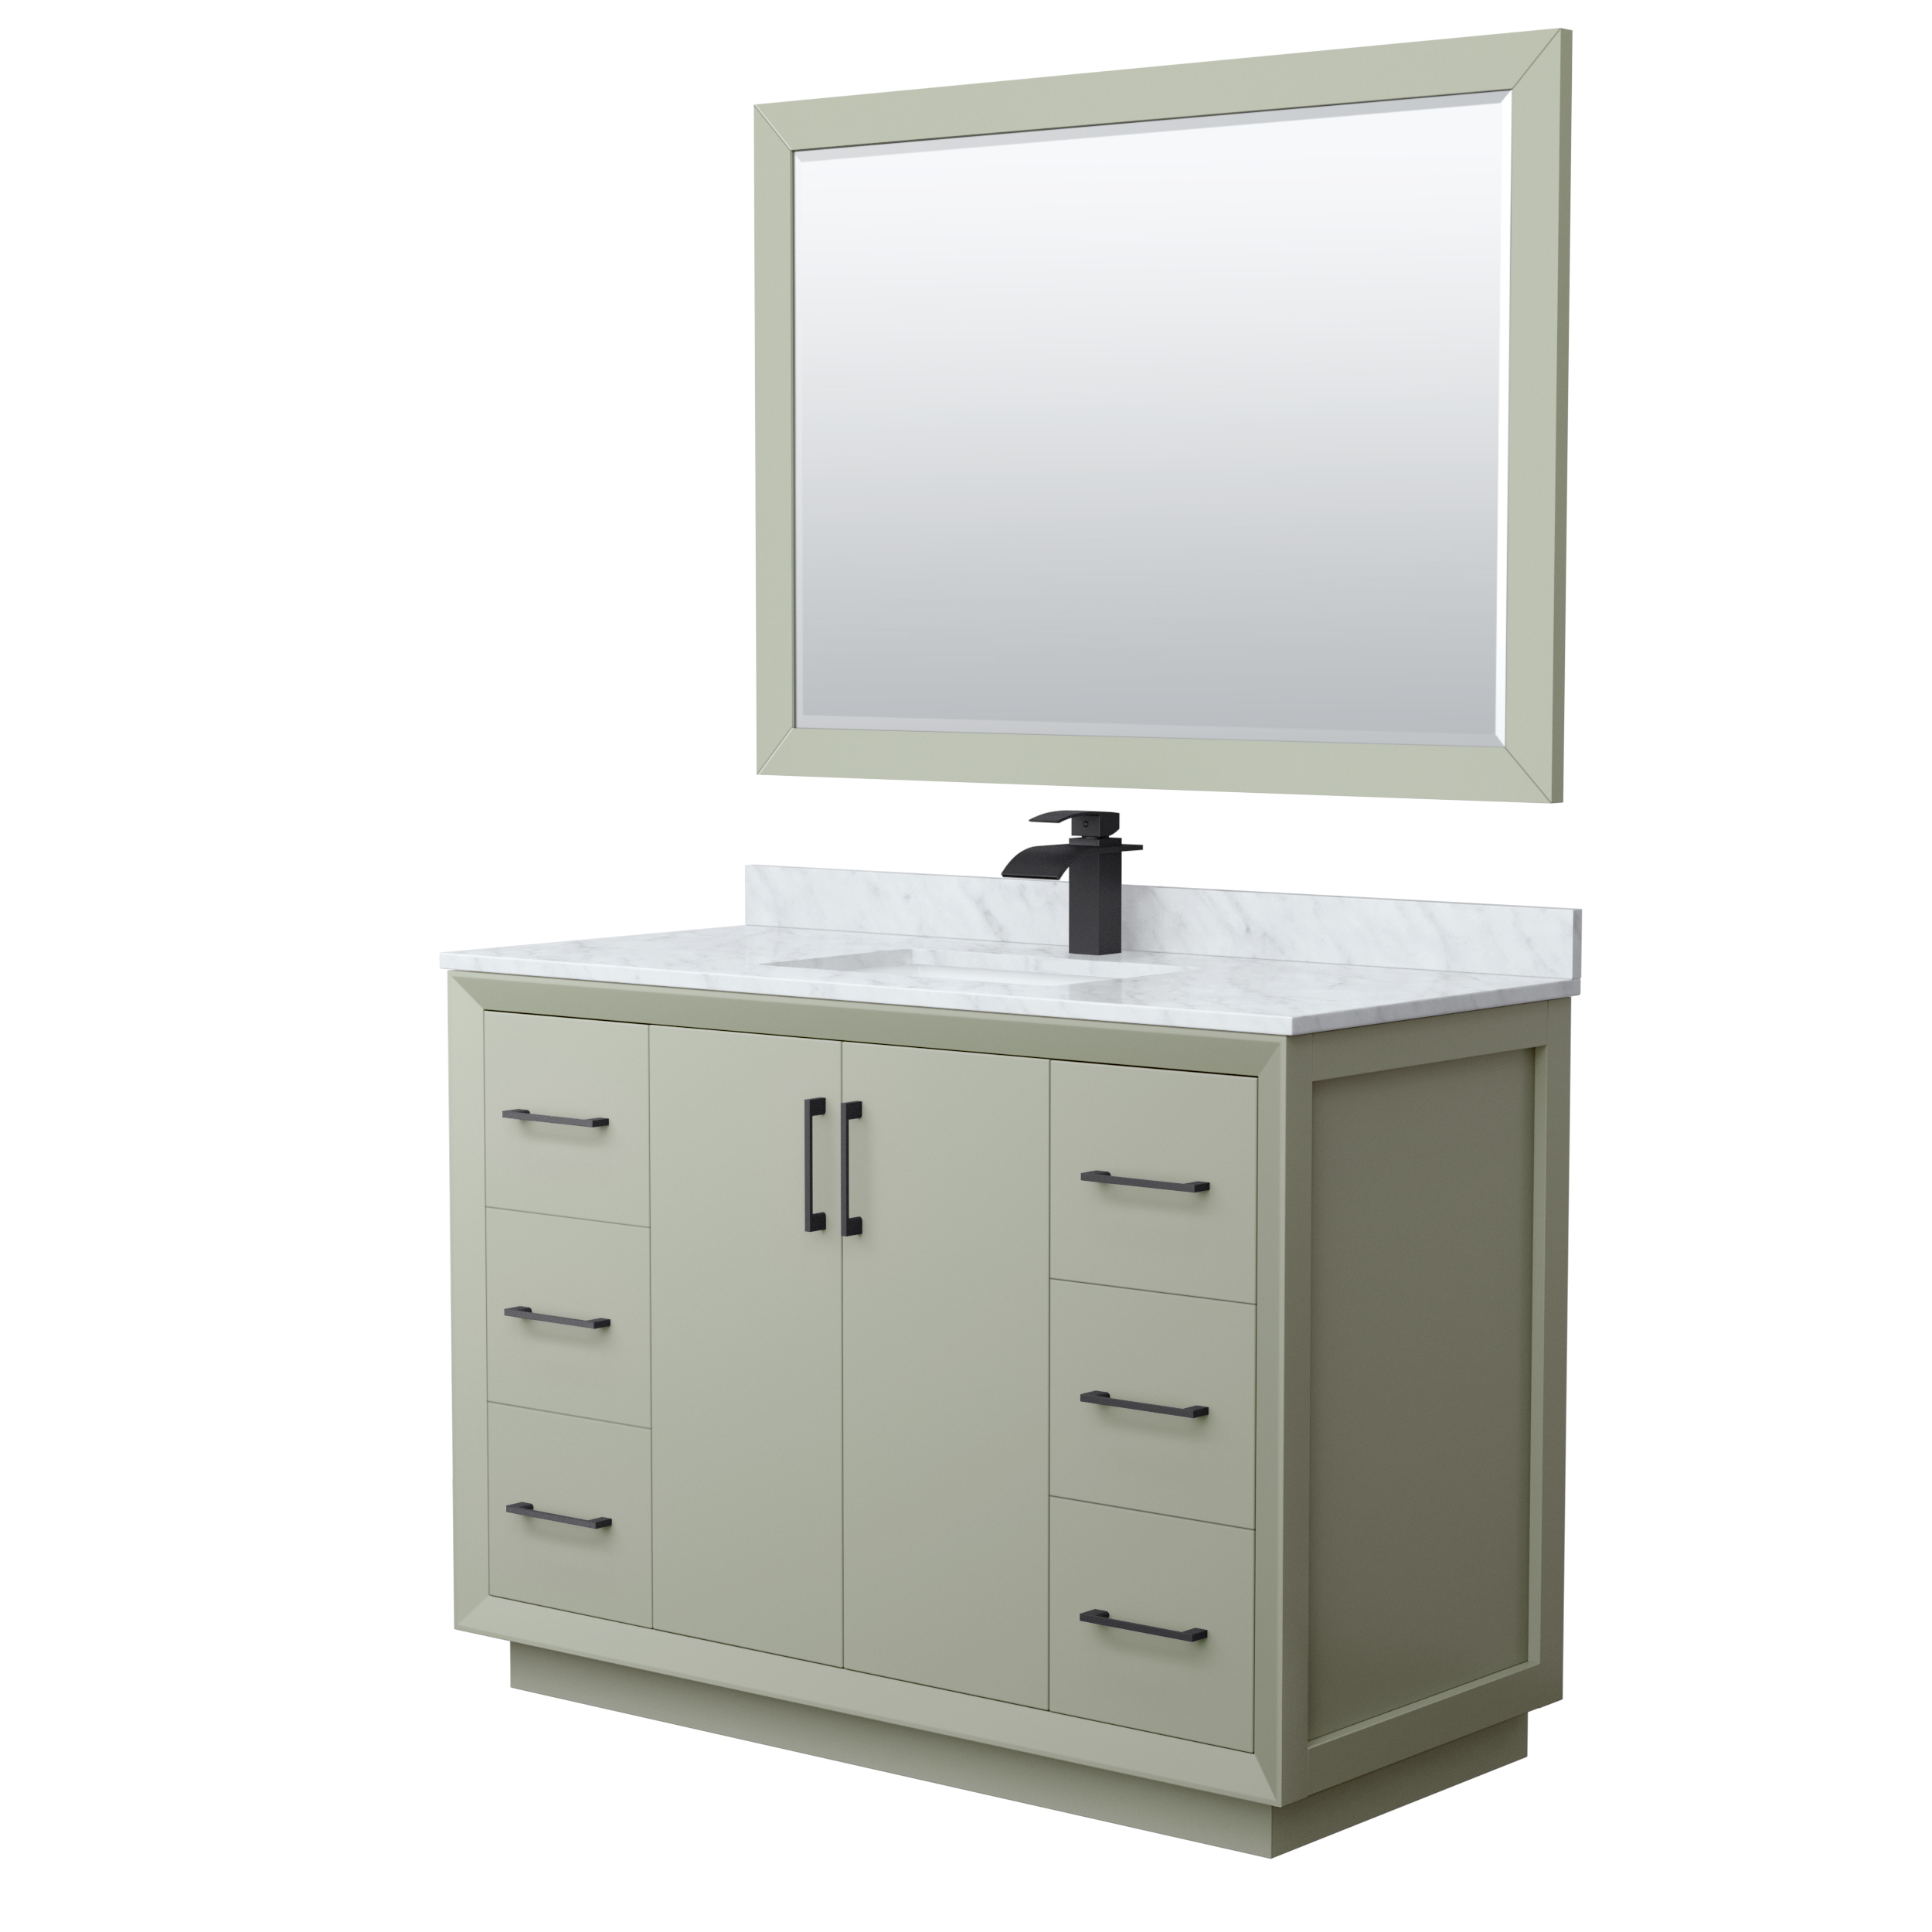 48" Transitional Single Vanity Base in Light Grey, 3 Top Options, with 3 Hardware Options and Mirror Option